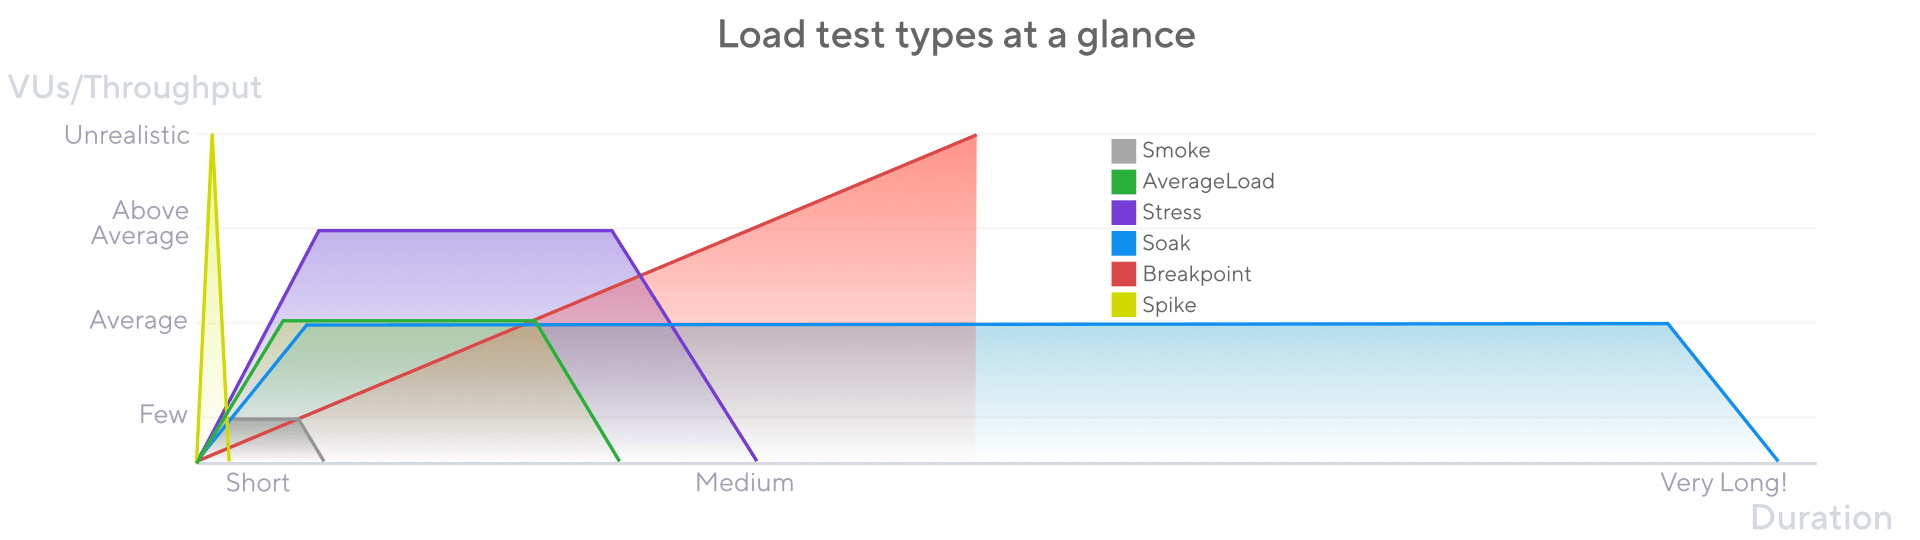 Load test types at glance